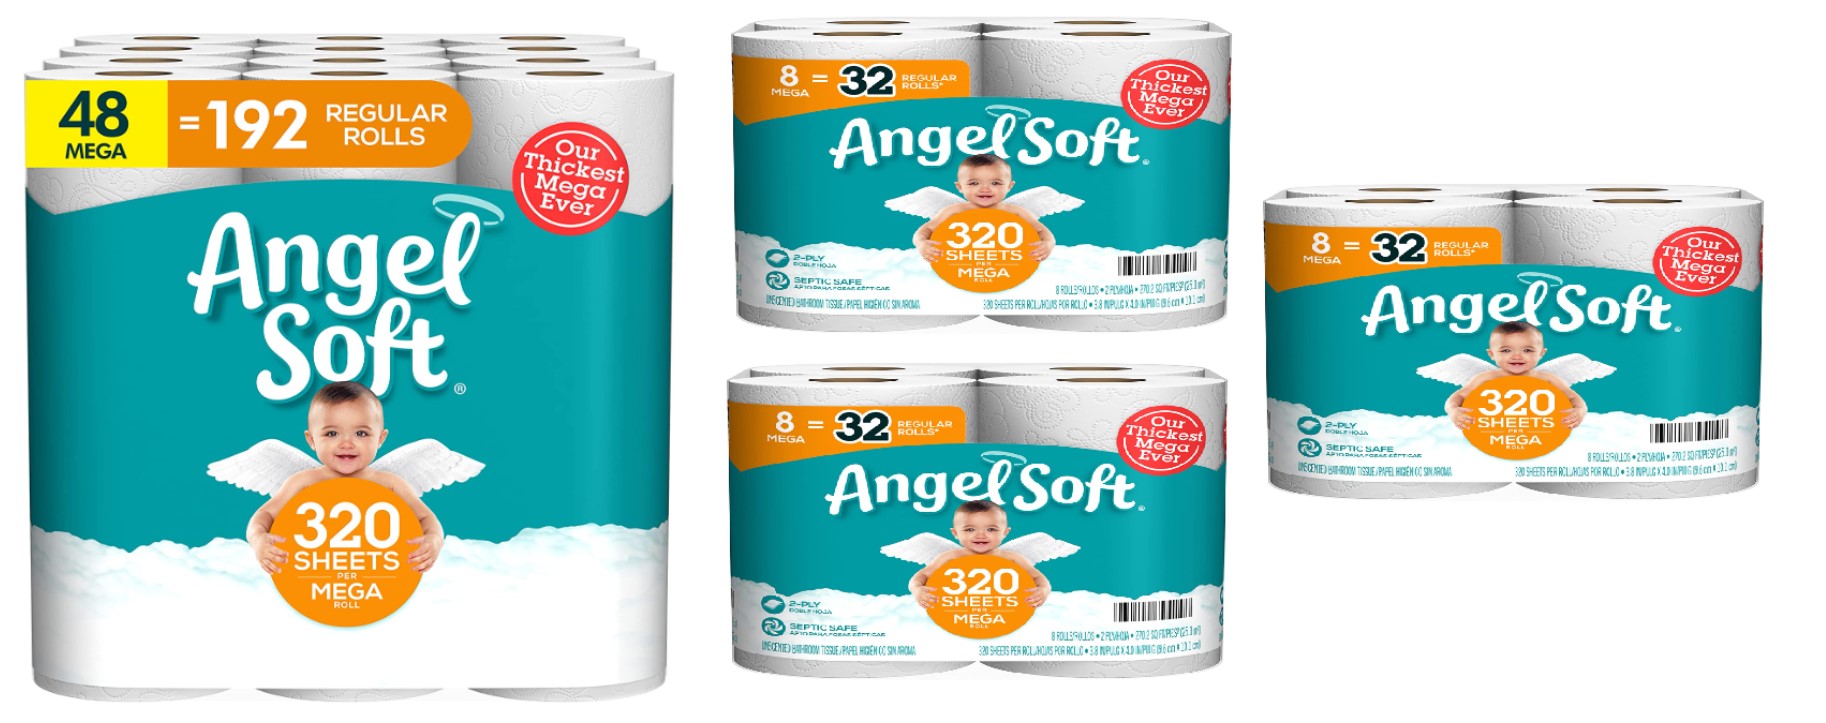 80-Count Angel Soft 2-Ply Mega Rolls Toilet Paper $39.22 ($0.49 each)+ Free Shipping